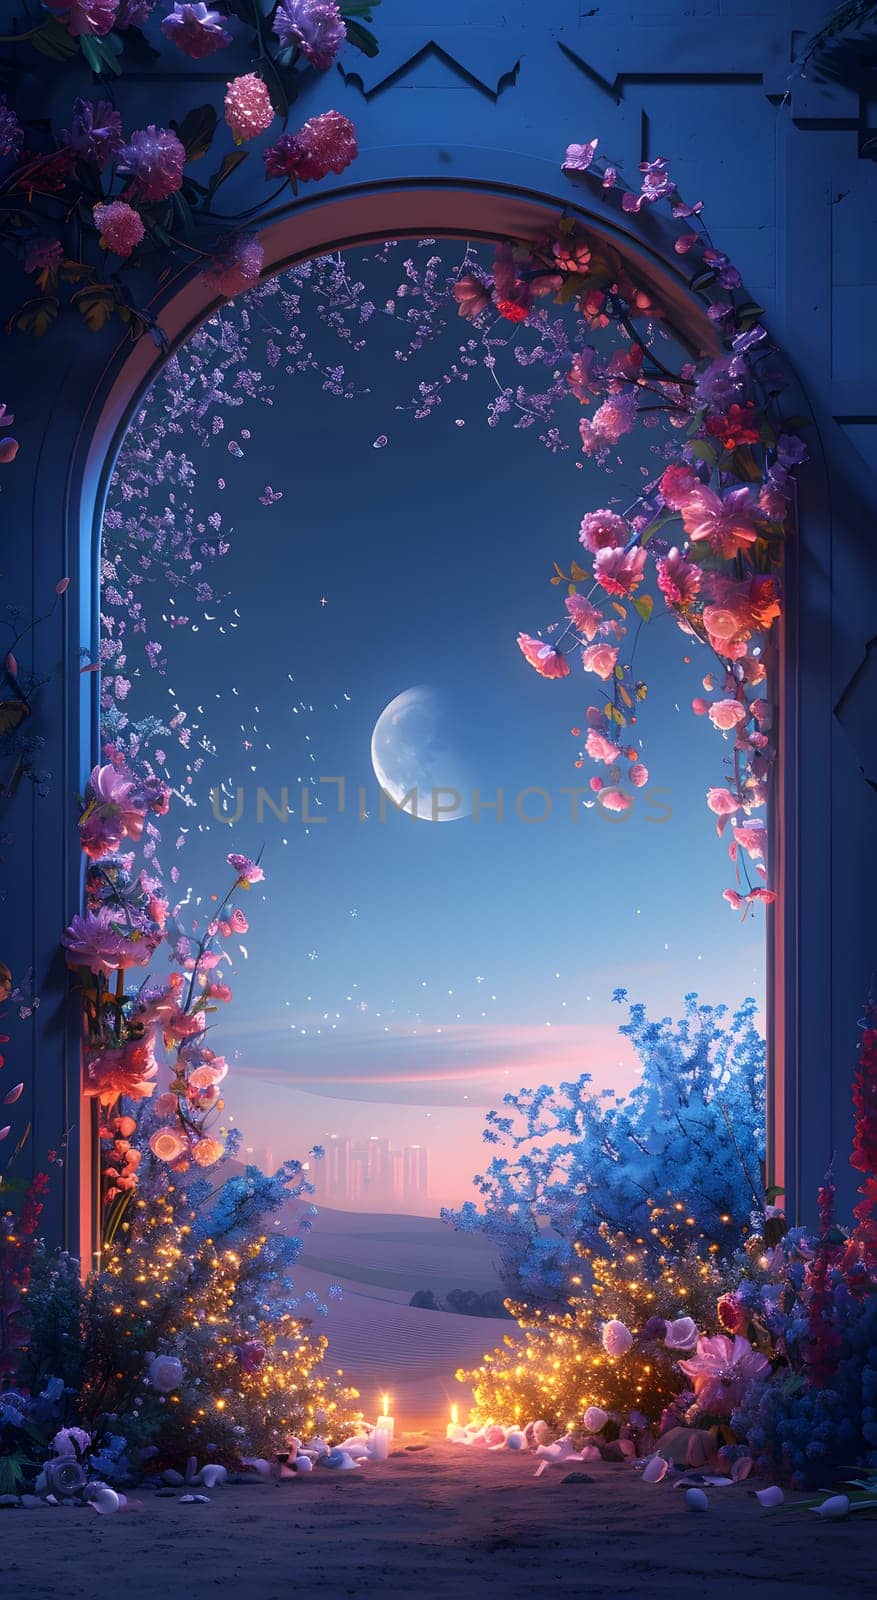 A crescent moon hangs in the midnight sky, framed by an archway and surrounded by magenta flowers. The scene is like a piece of art in the worlds landscape